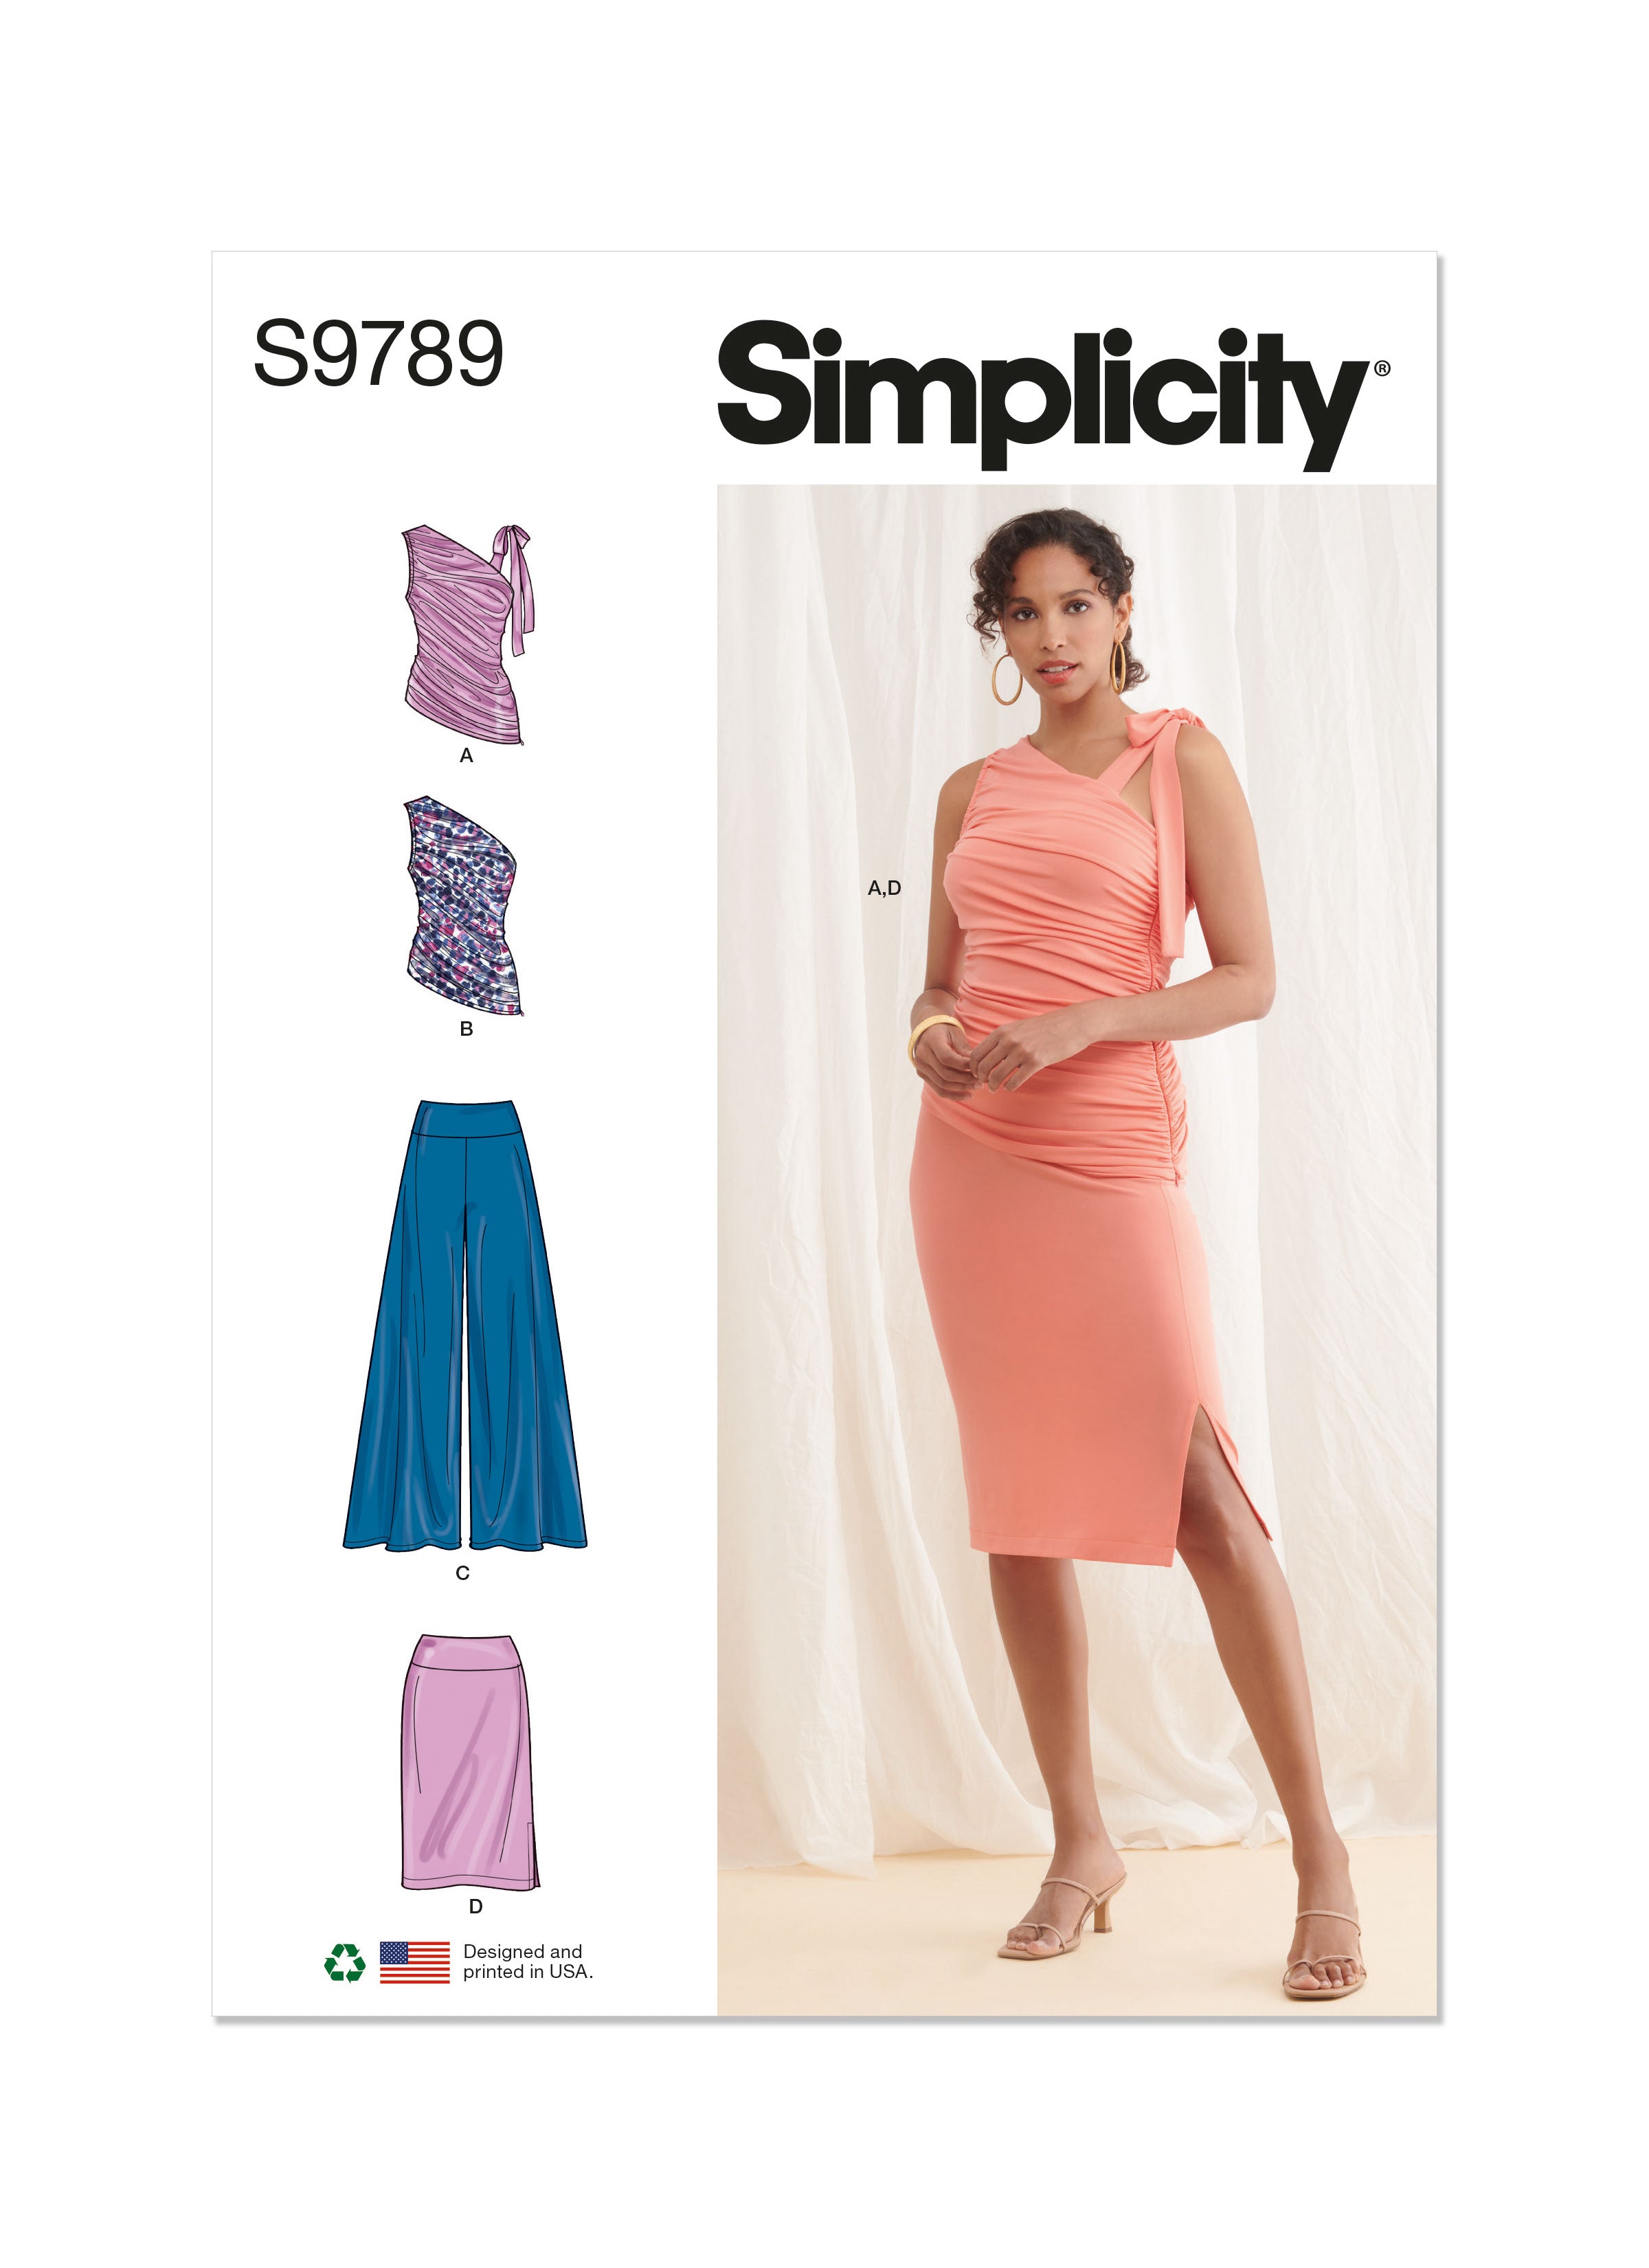 Simplicity sewing pattern 9789 Misses Knit Tops, Pants and Skirt from Jaycotts Sewing Supplies